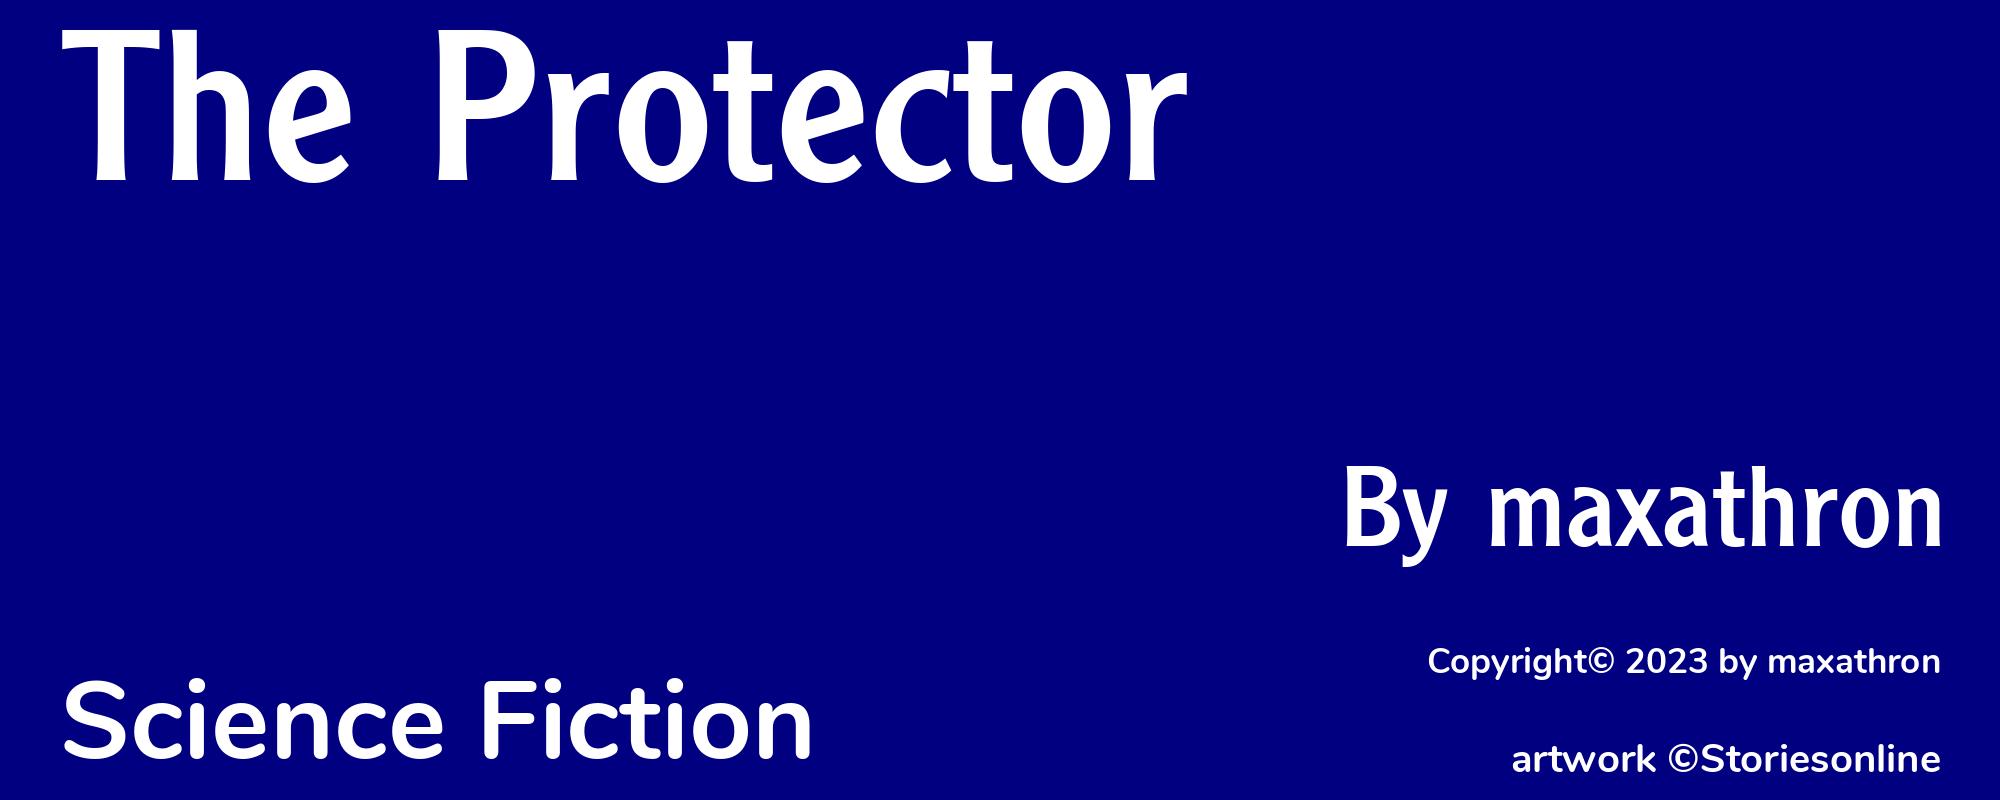 The Protector - Cover